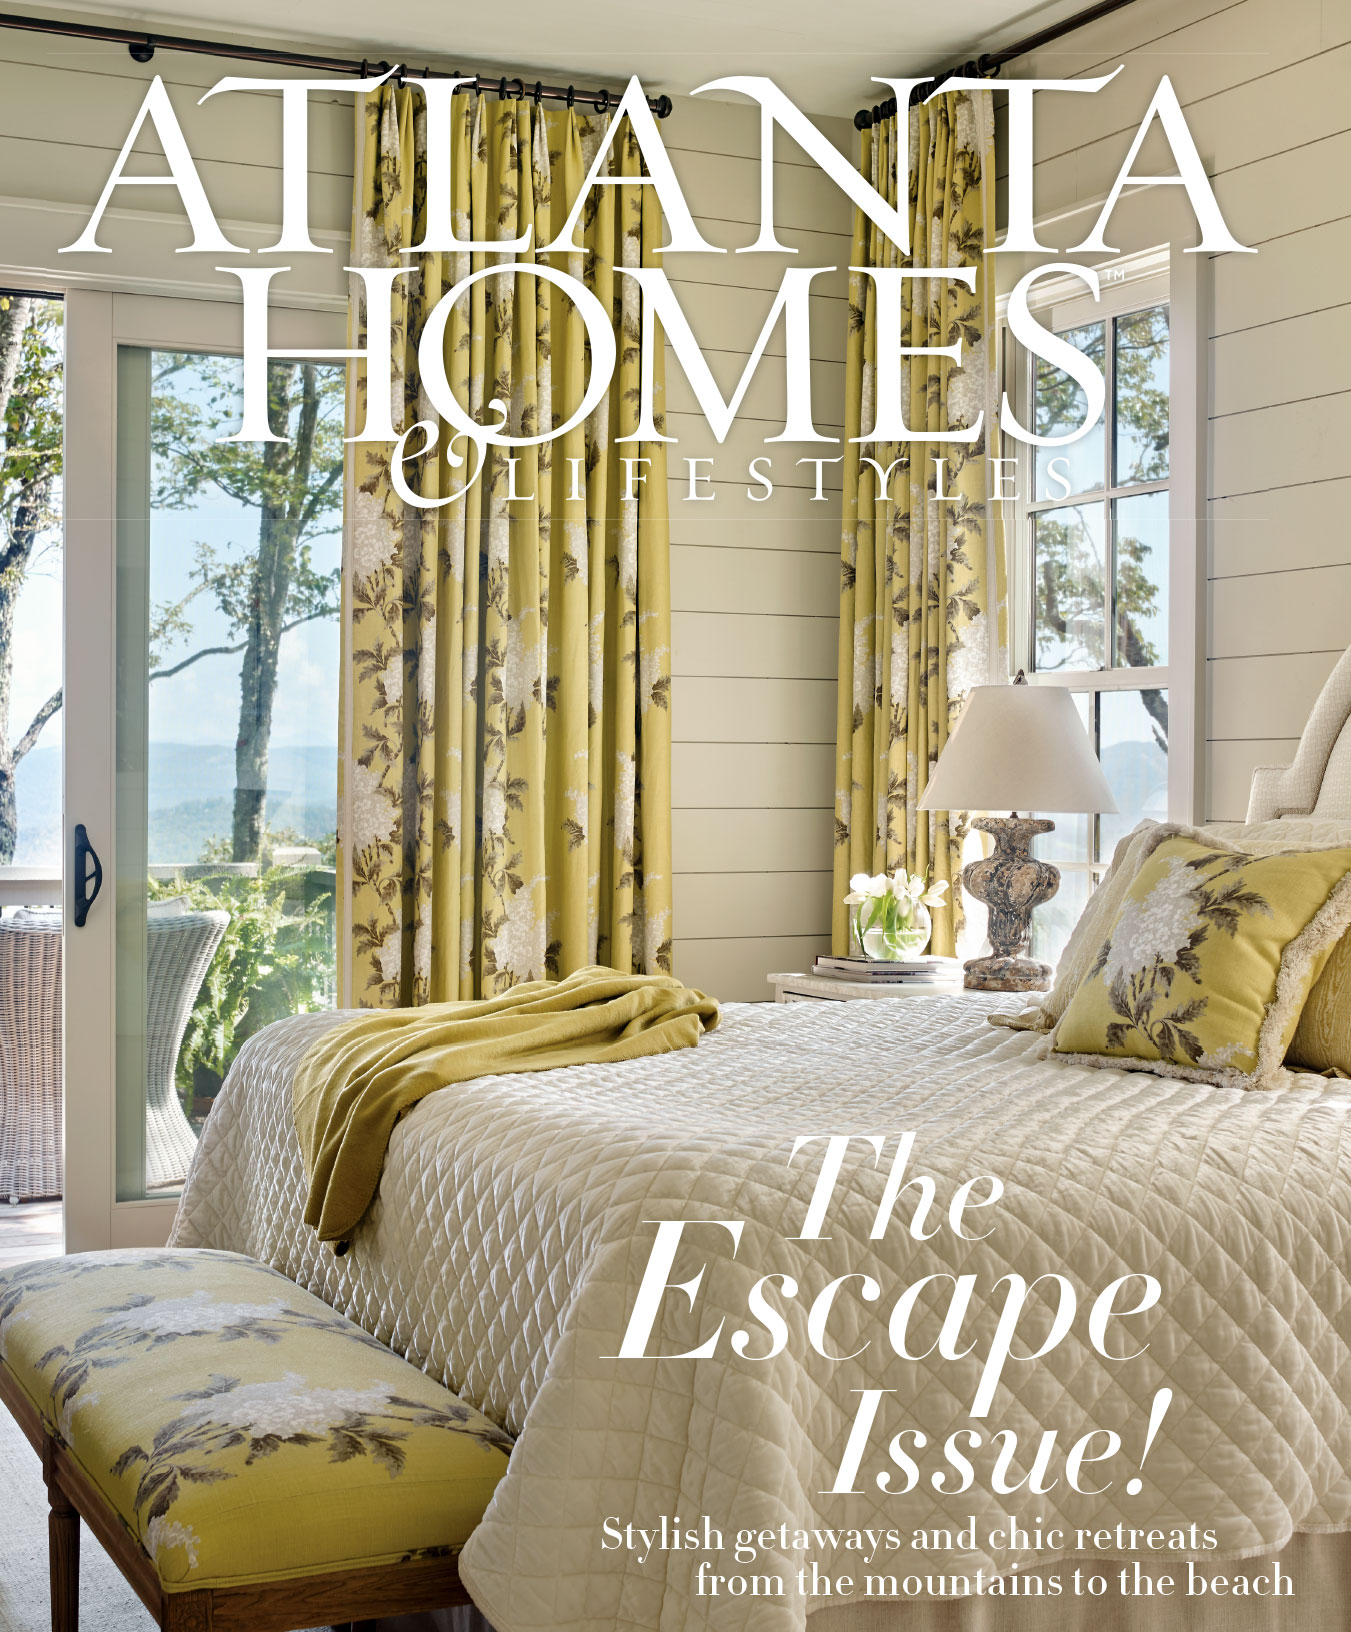 Atlanta Homes and Lifestyle Cover